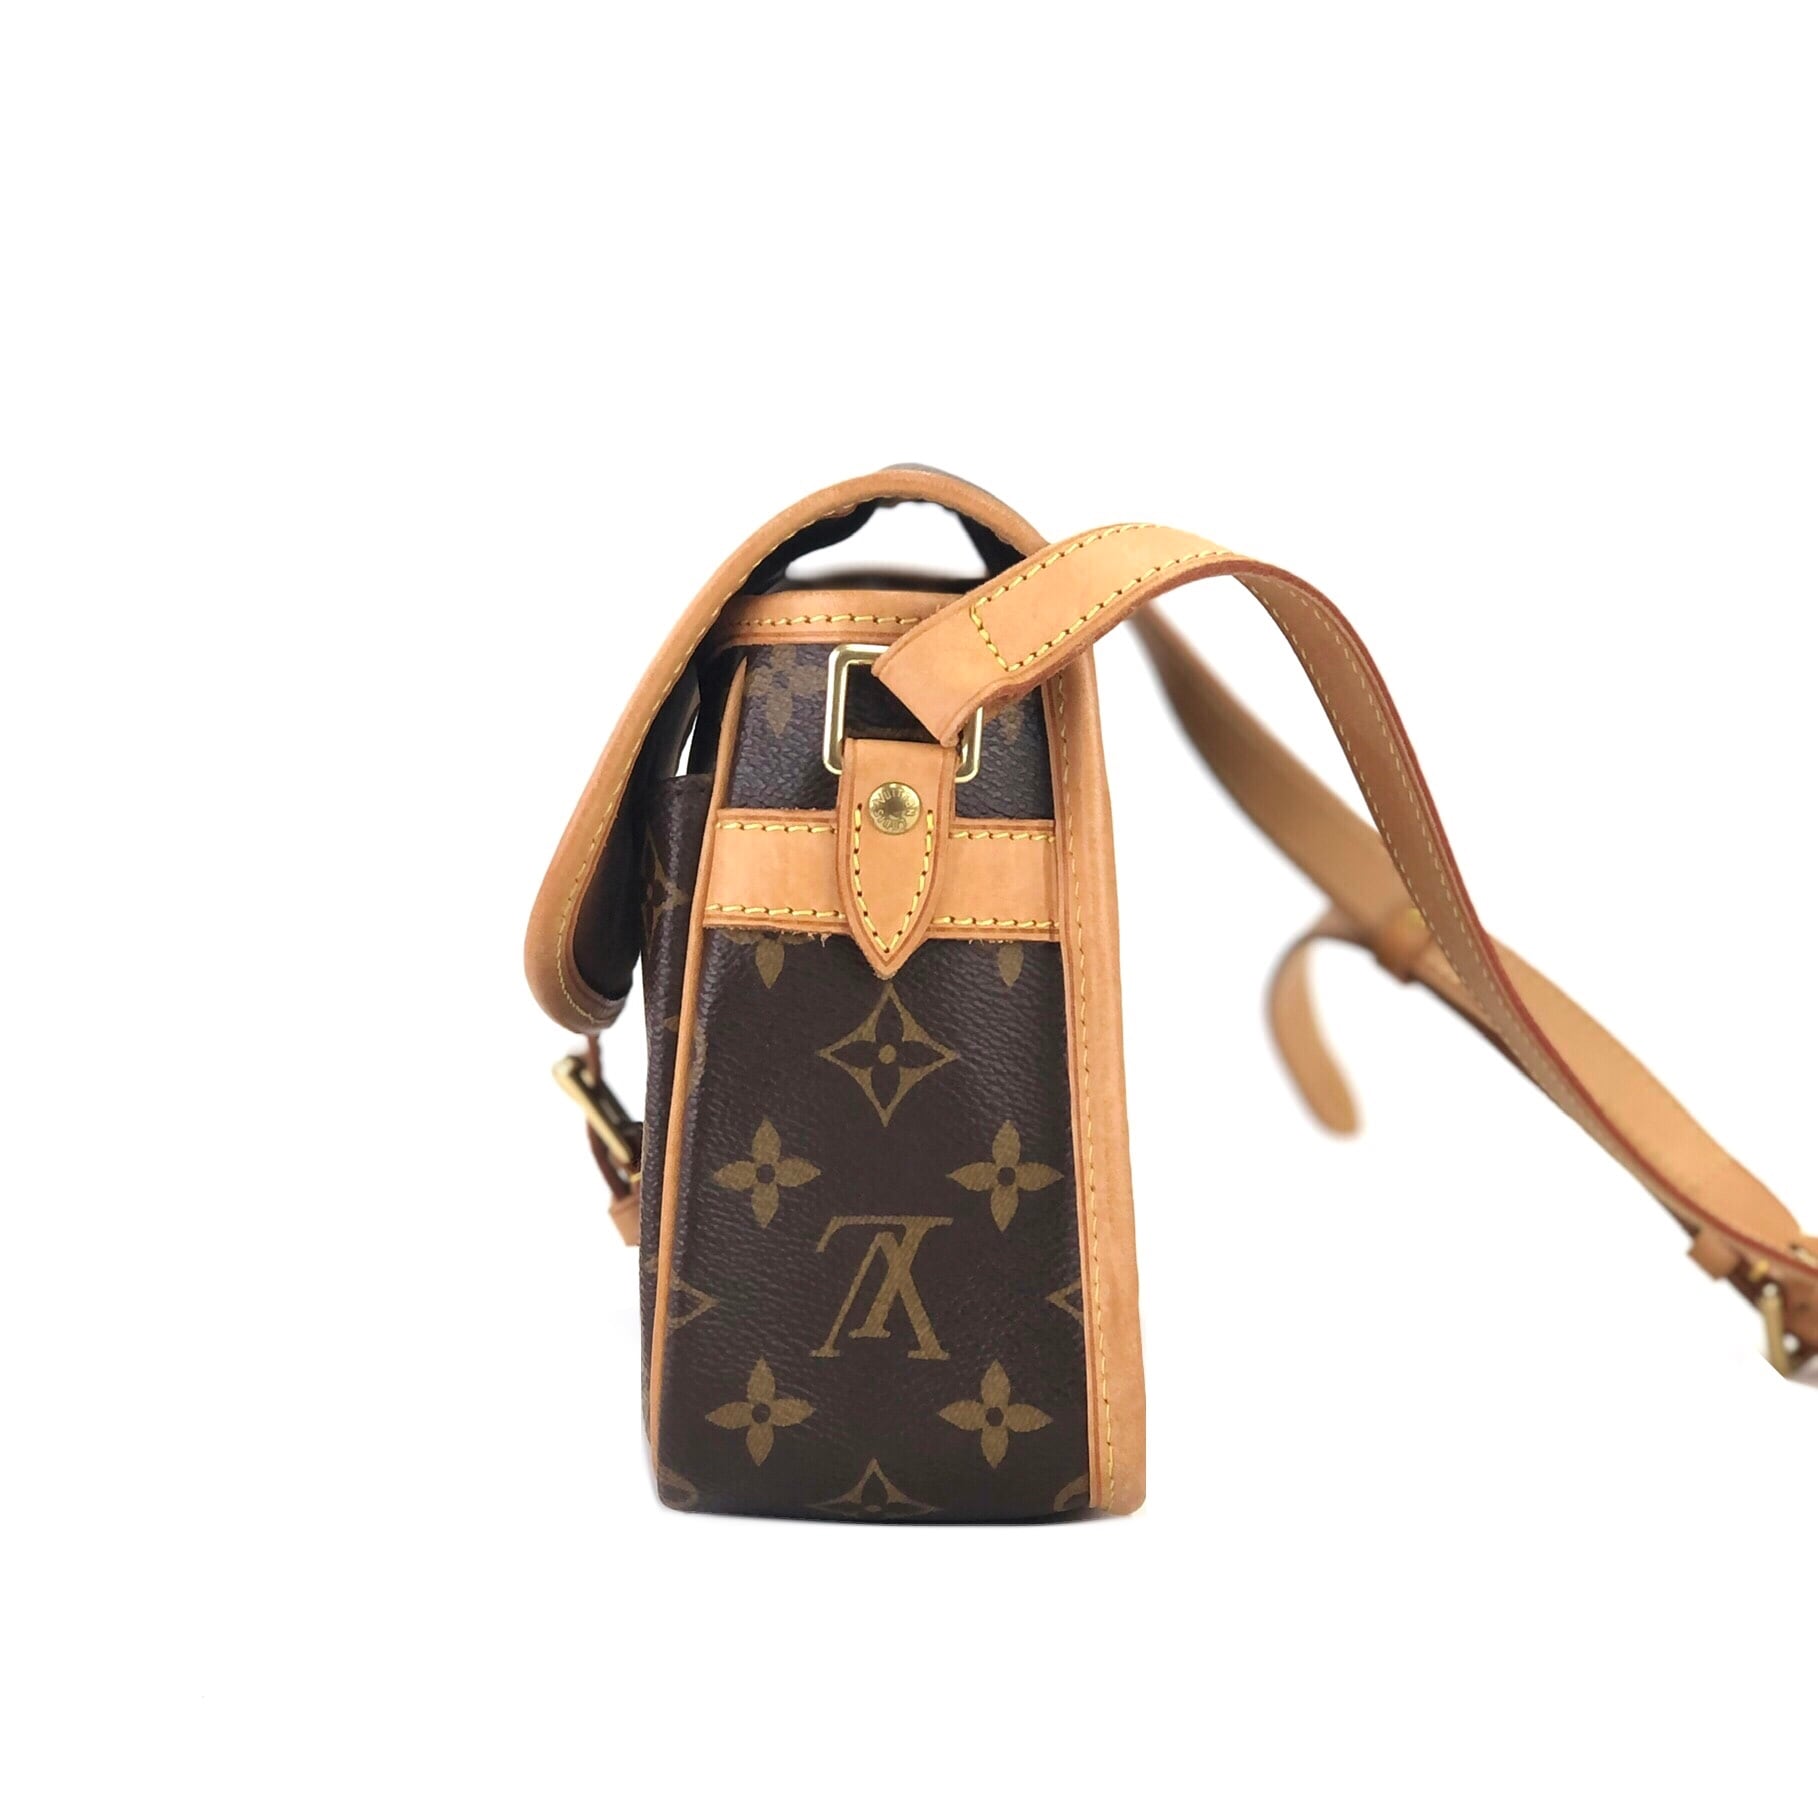 LOUIS VUITTON ルイヴィトン ヴィトン　モノグラム　M42250　ソローニュ　ショルダーバッグ　ブラウン　vintage　ヴィンテージ　 オールド　t3bayh | VintageShop solo powered by BASE